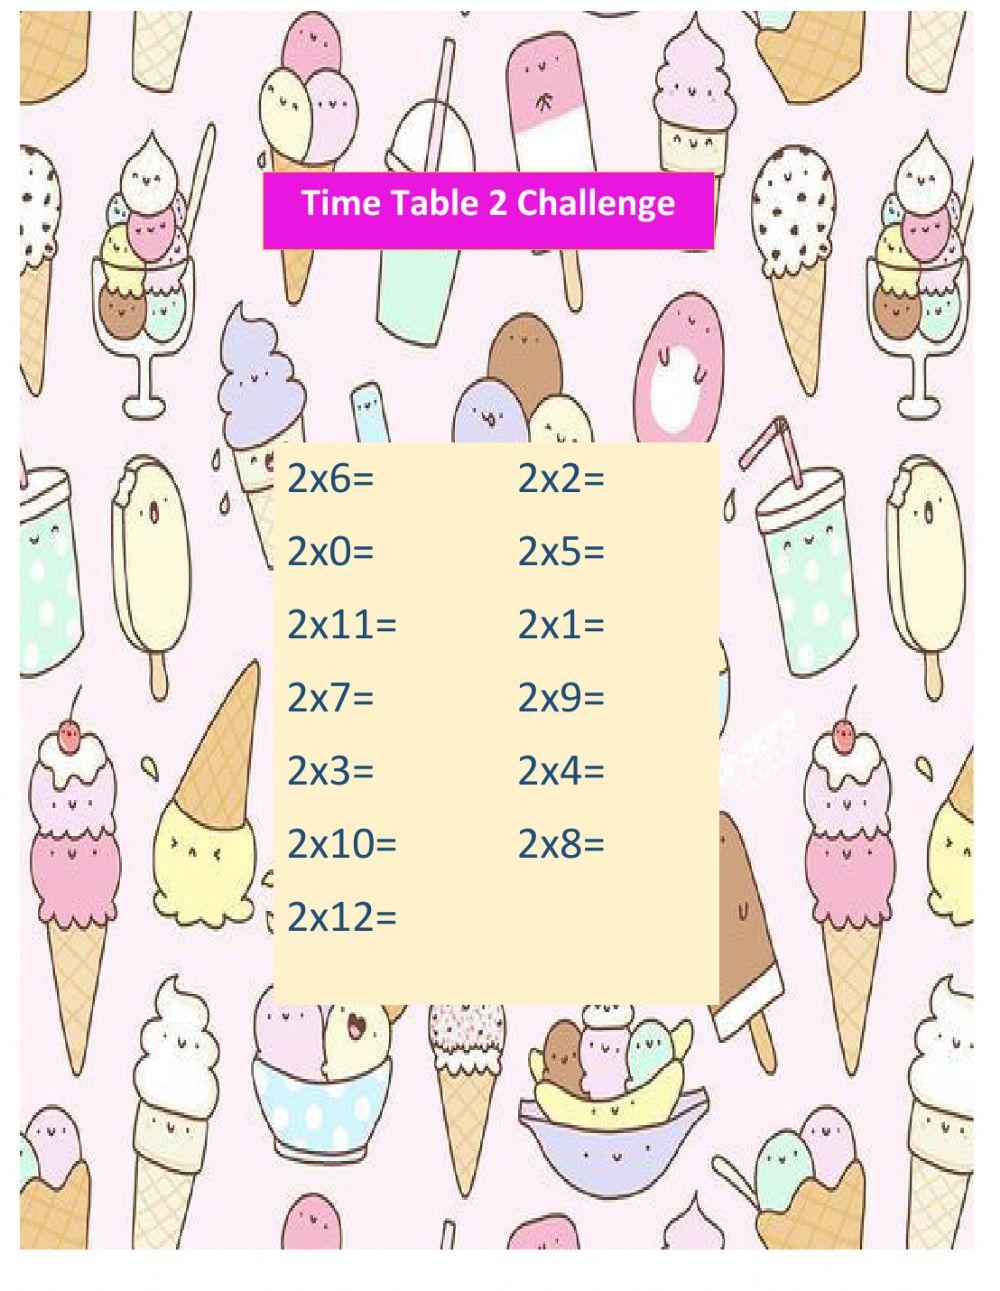 Time table 2 Challenge